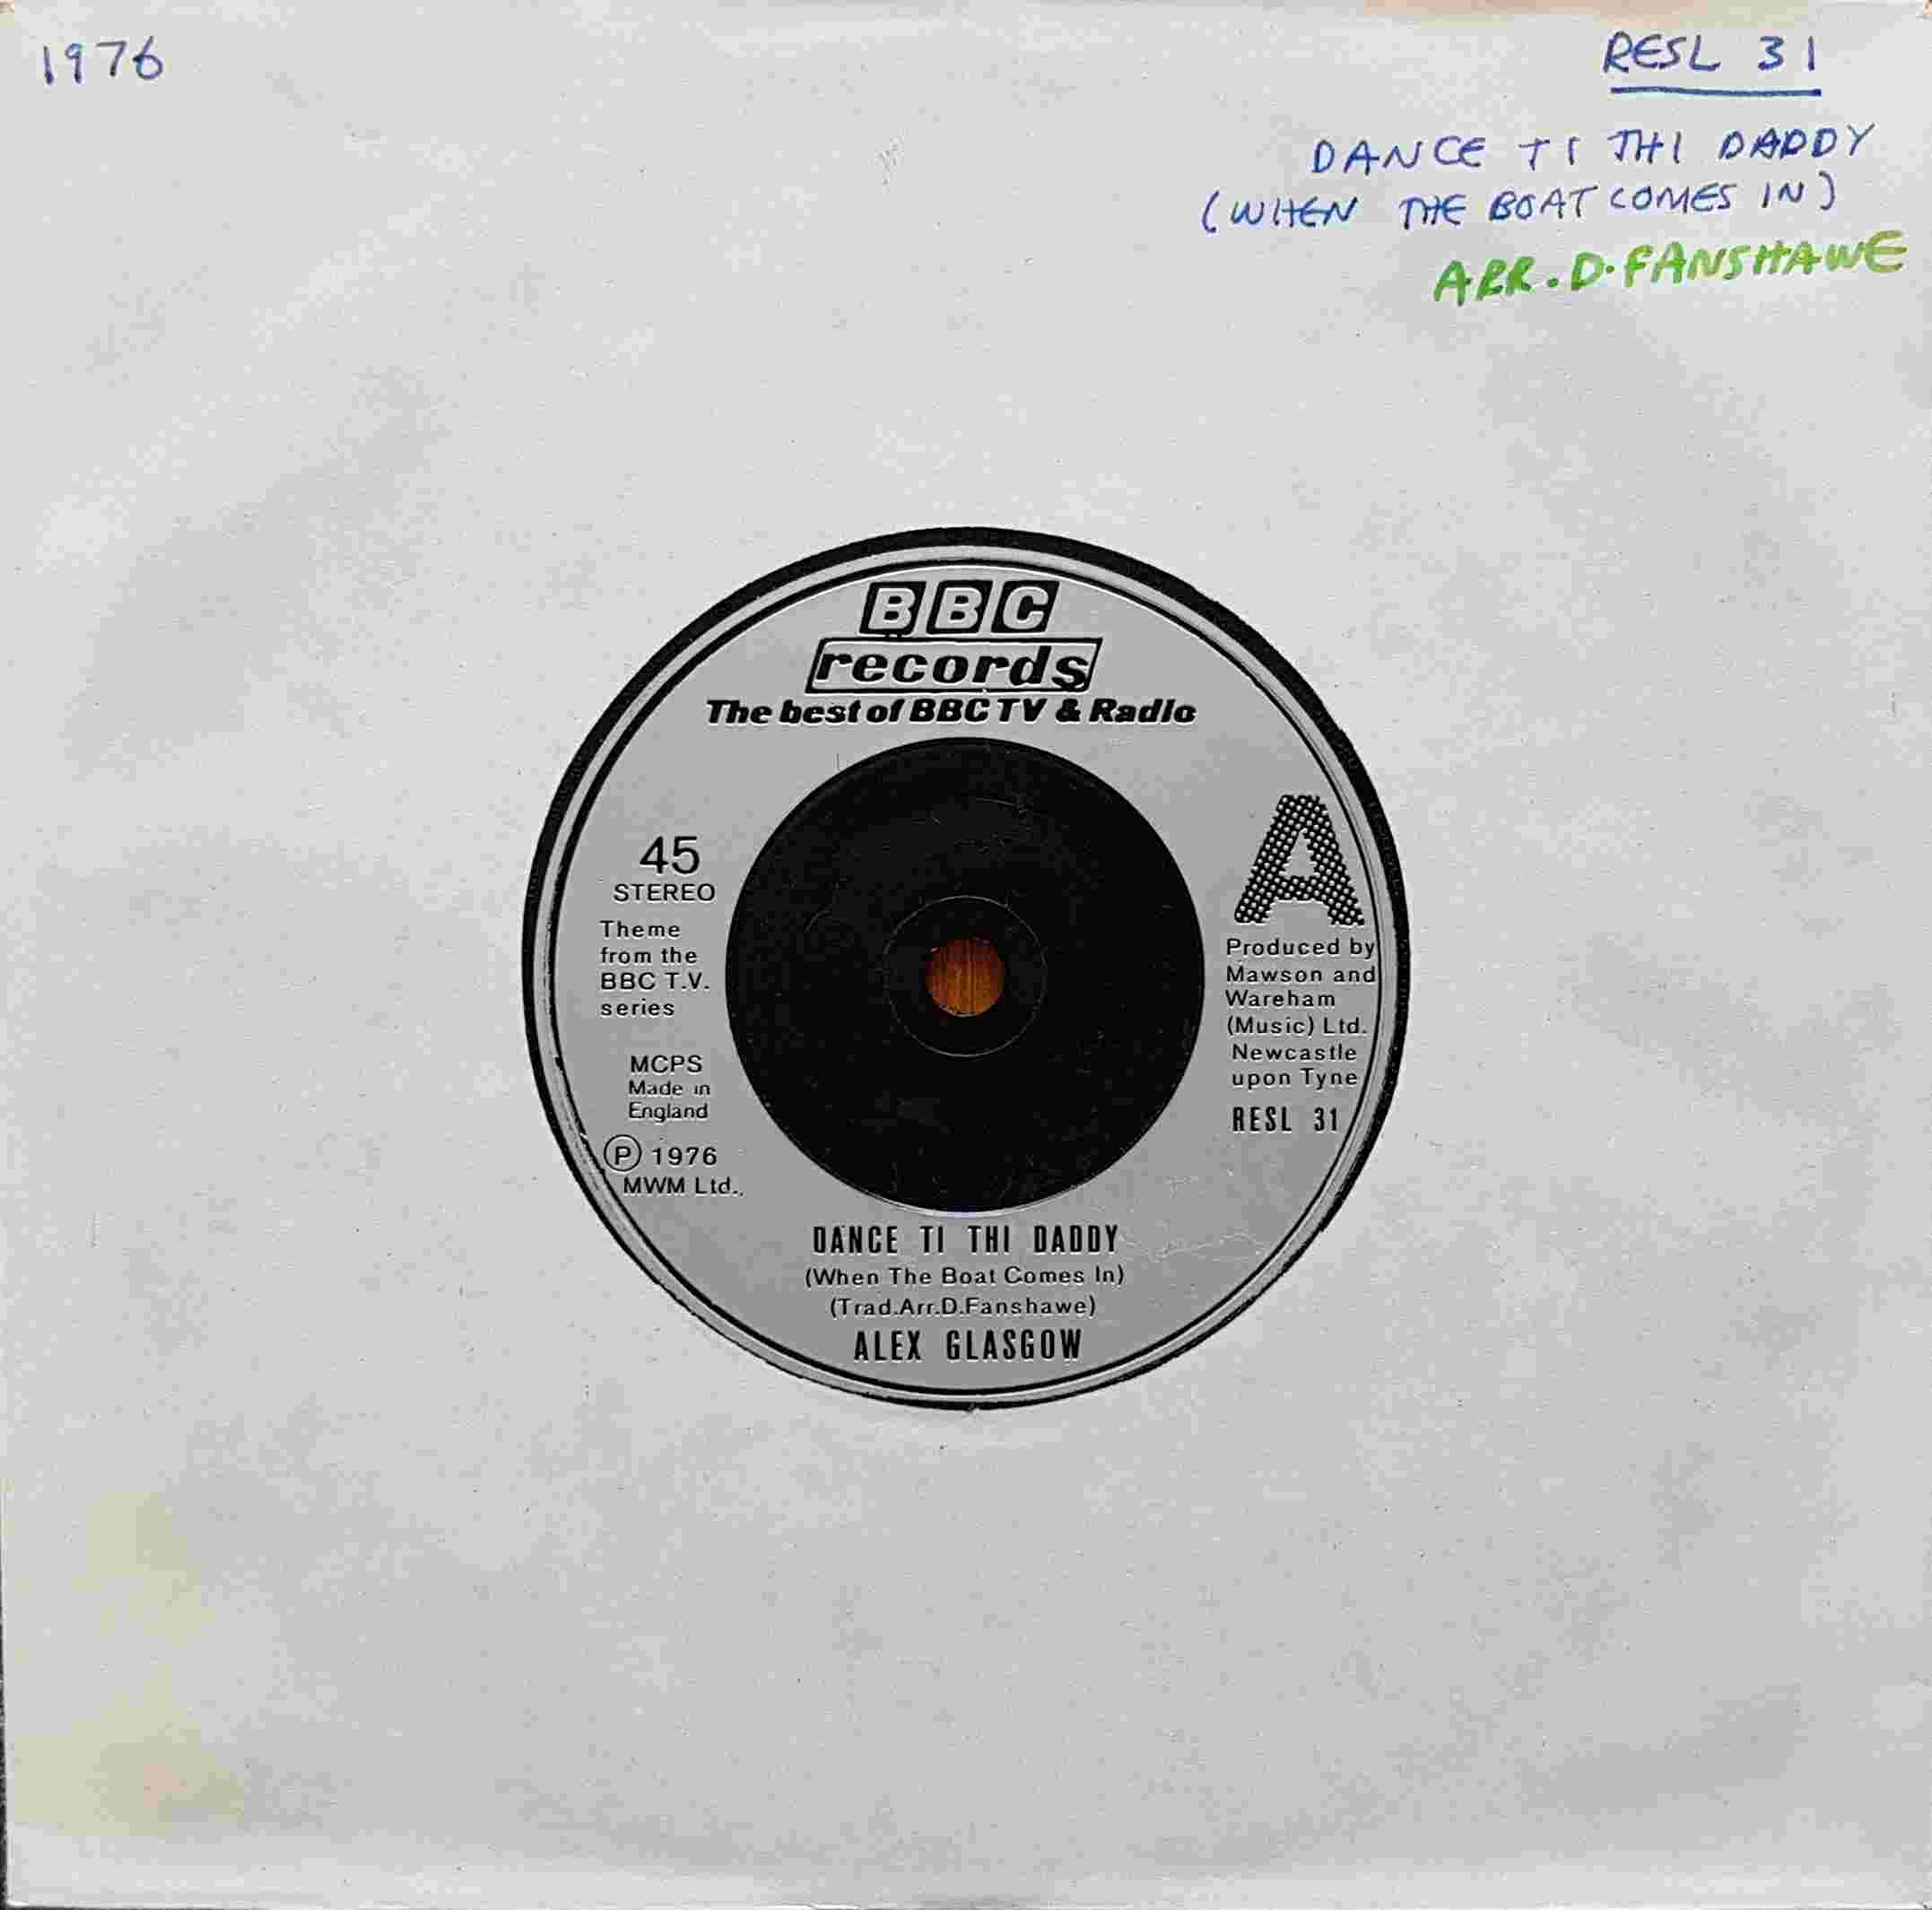 Picture of RESL 31 Dance ti thi daddy (When the boat comes in) by artist Arr. David Fanshawe / Arr. K Statham from the BBC singles - Records and Tapes library